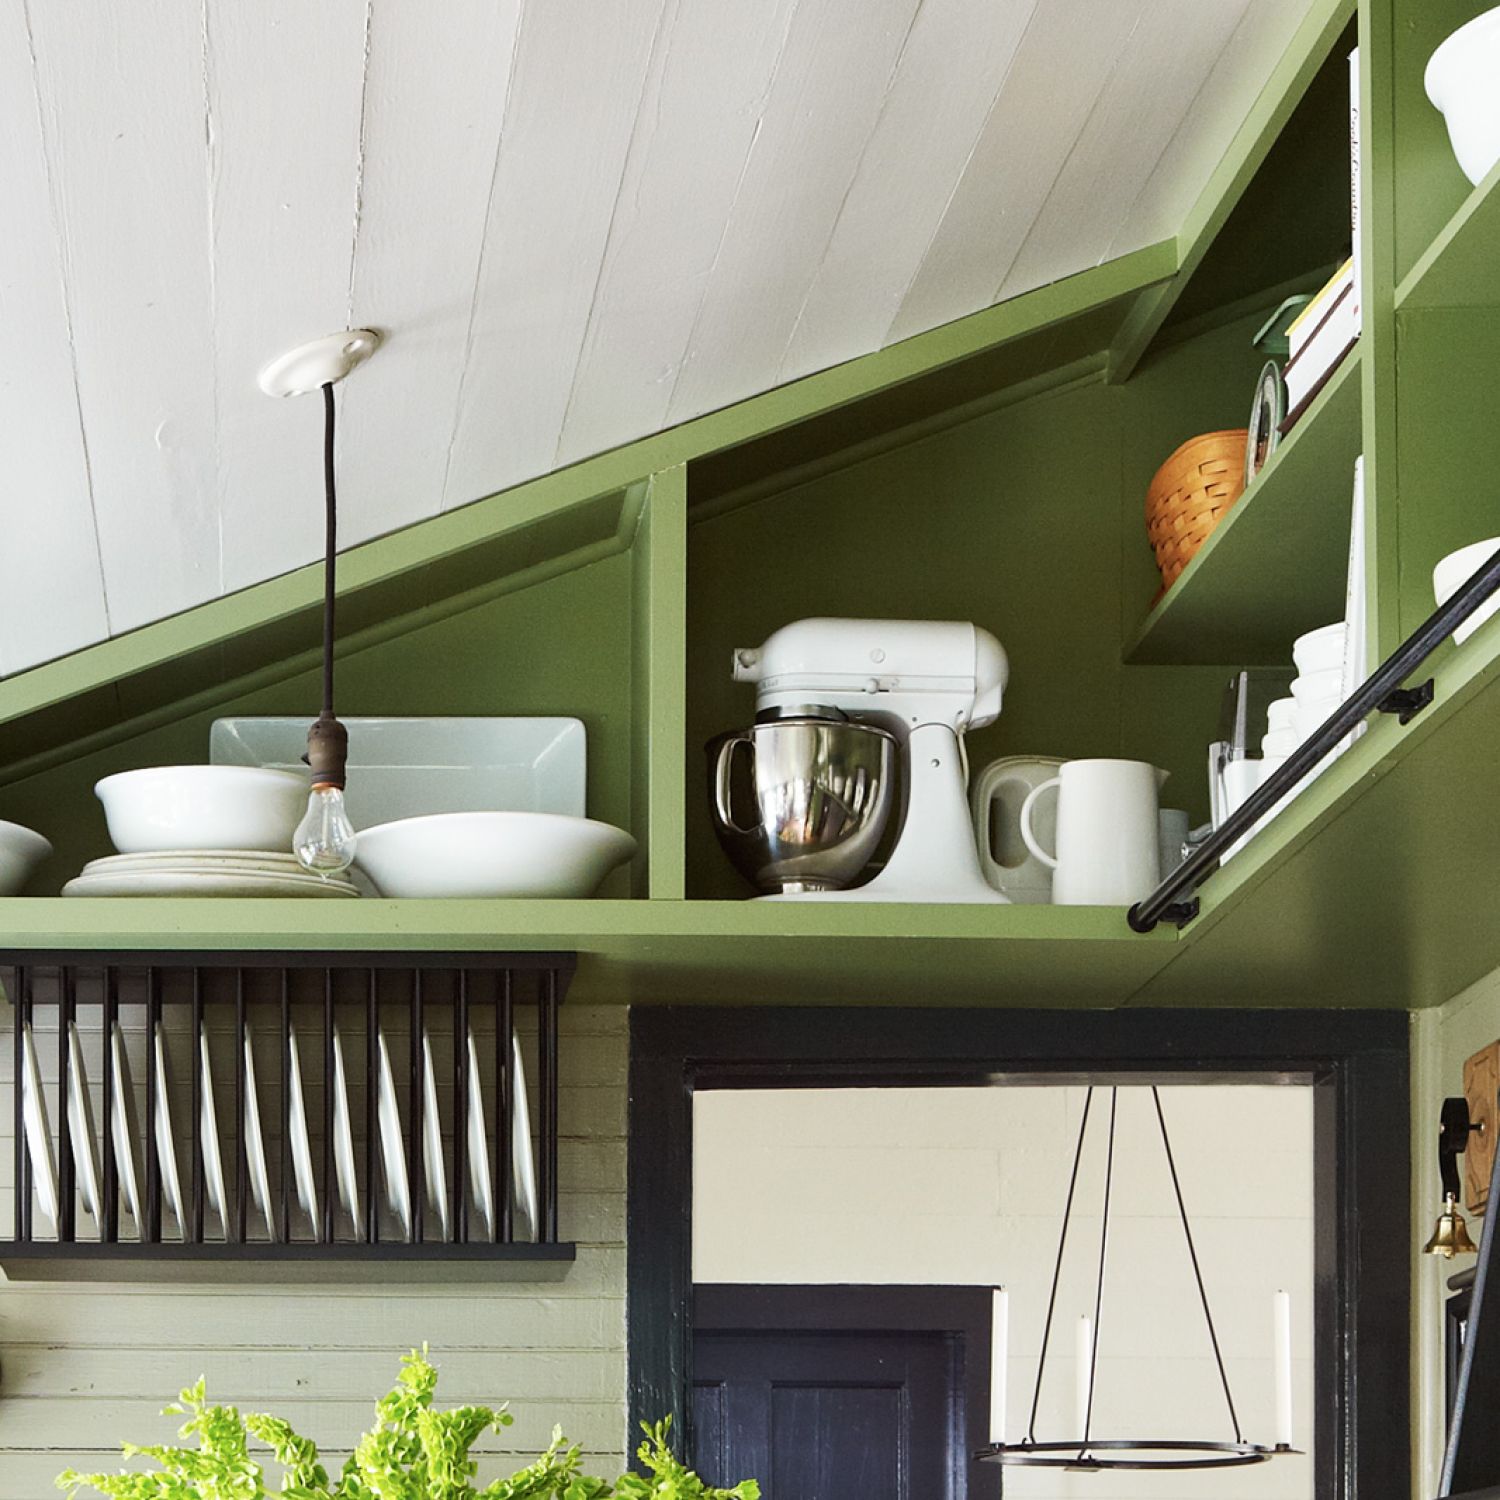 Kitchen with built-in rafter shelving